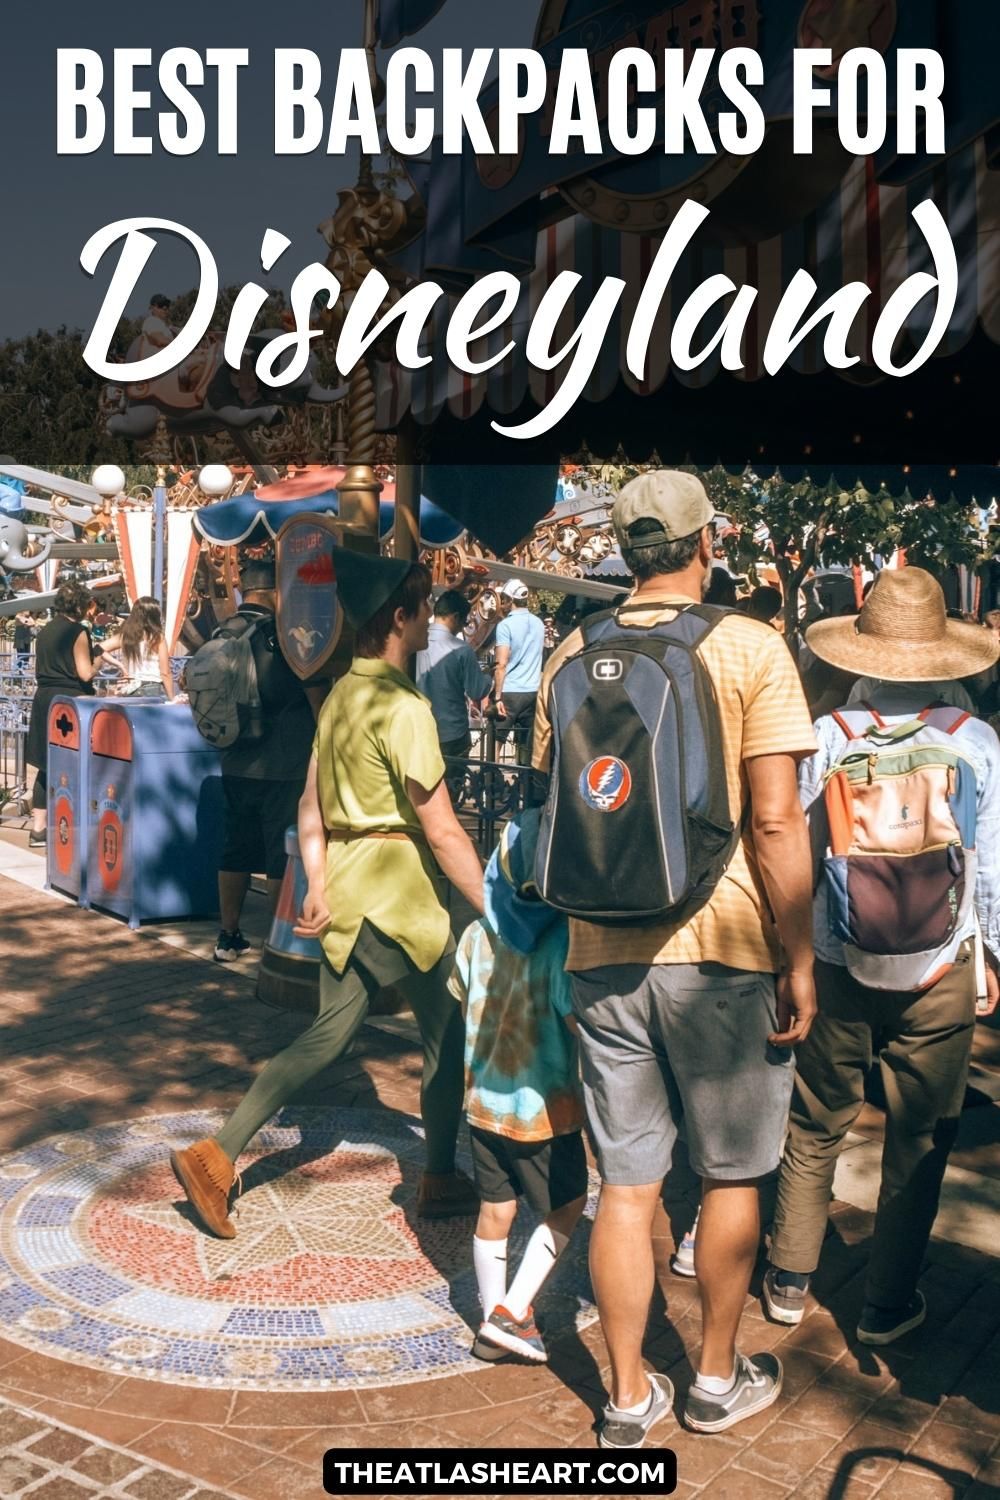 Two people wearing backpacks, seen from behind, walking with a small boy and a man in a Peter Pan costume at Disneyland, with the text overlay, "Best Backpacks for Disneyland."